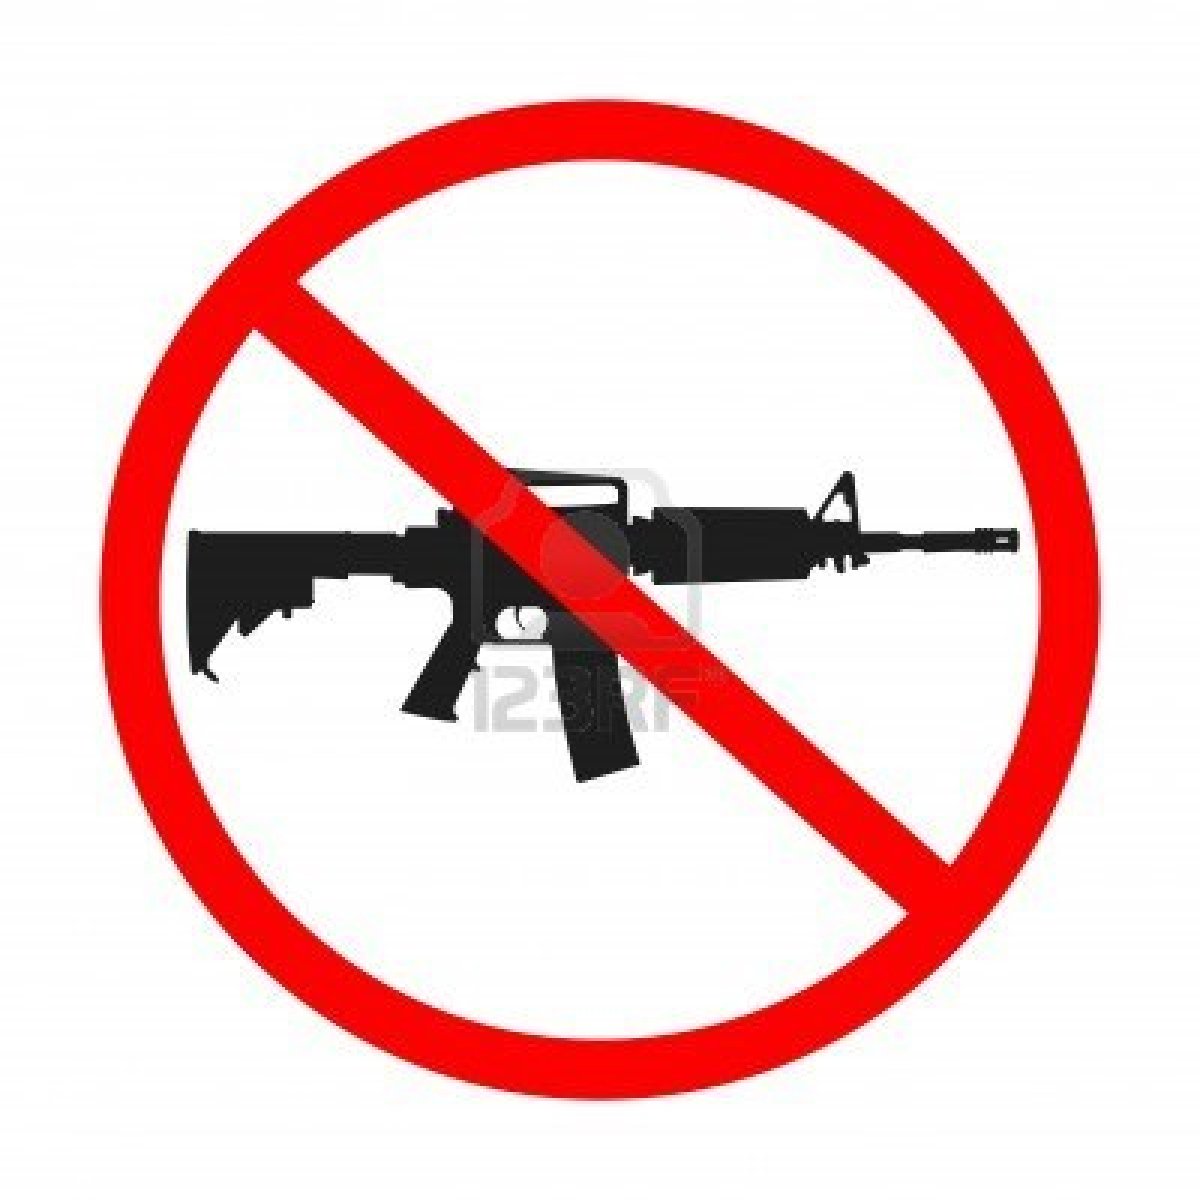     Weapons Bill Today Which Is Expected To Ban Sale Of All Guns With